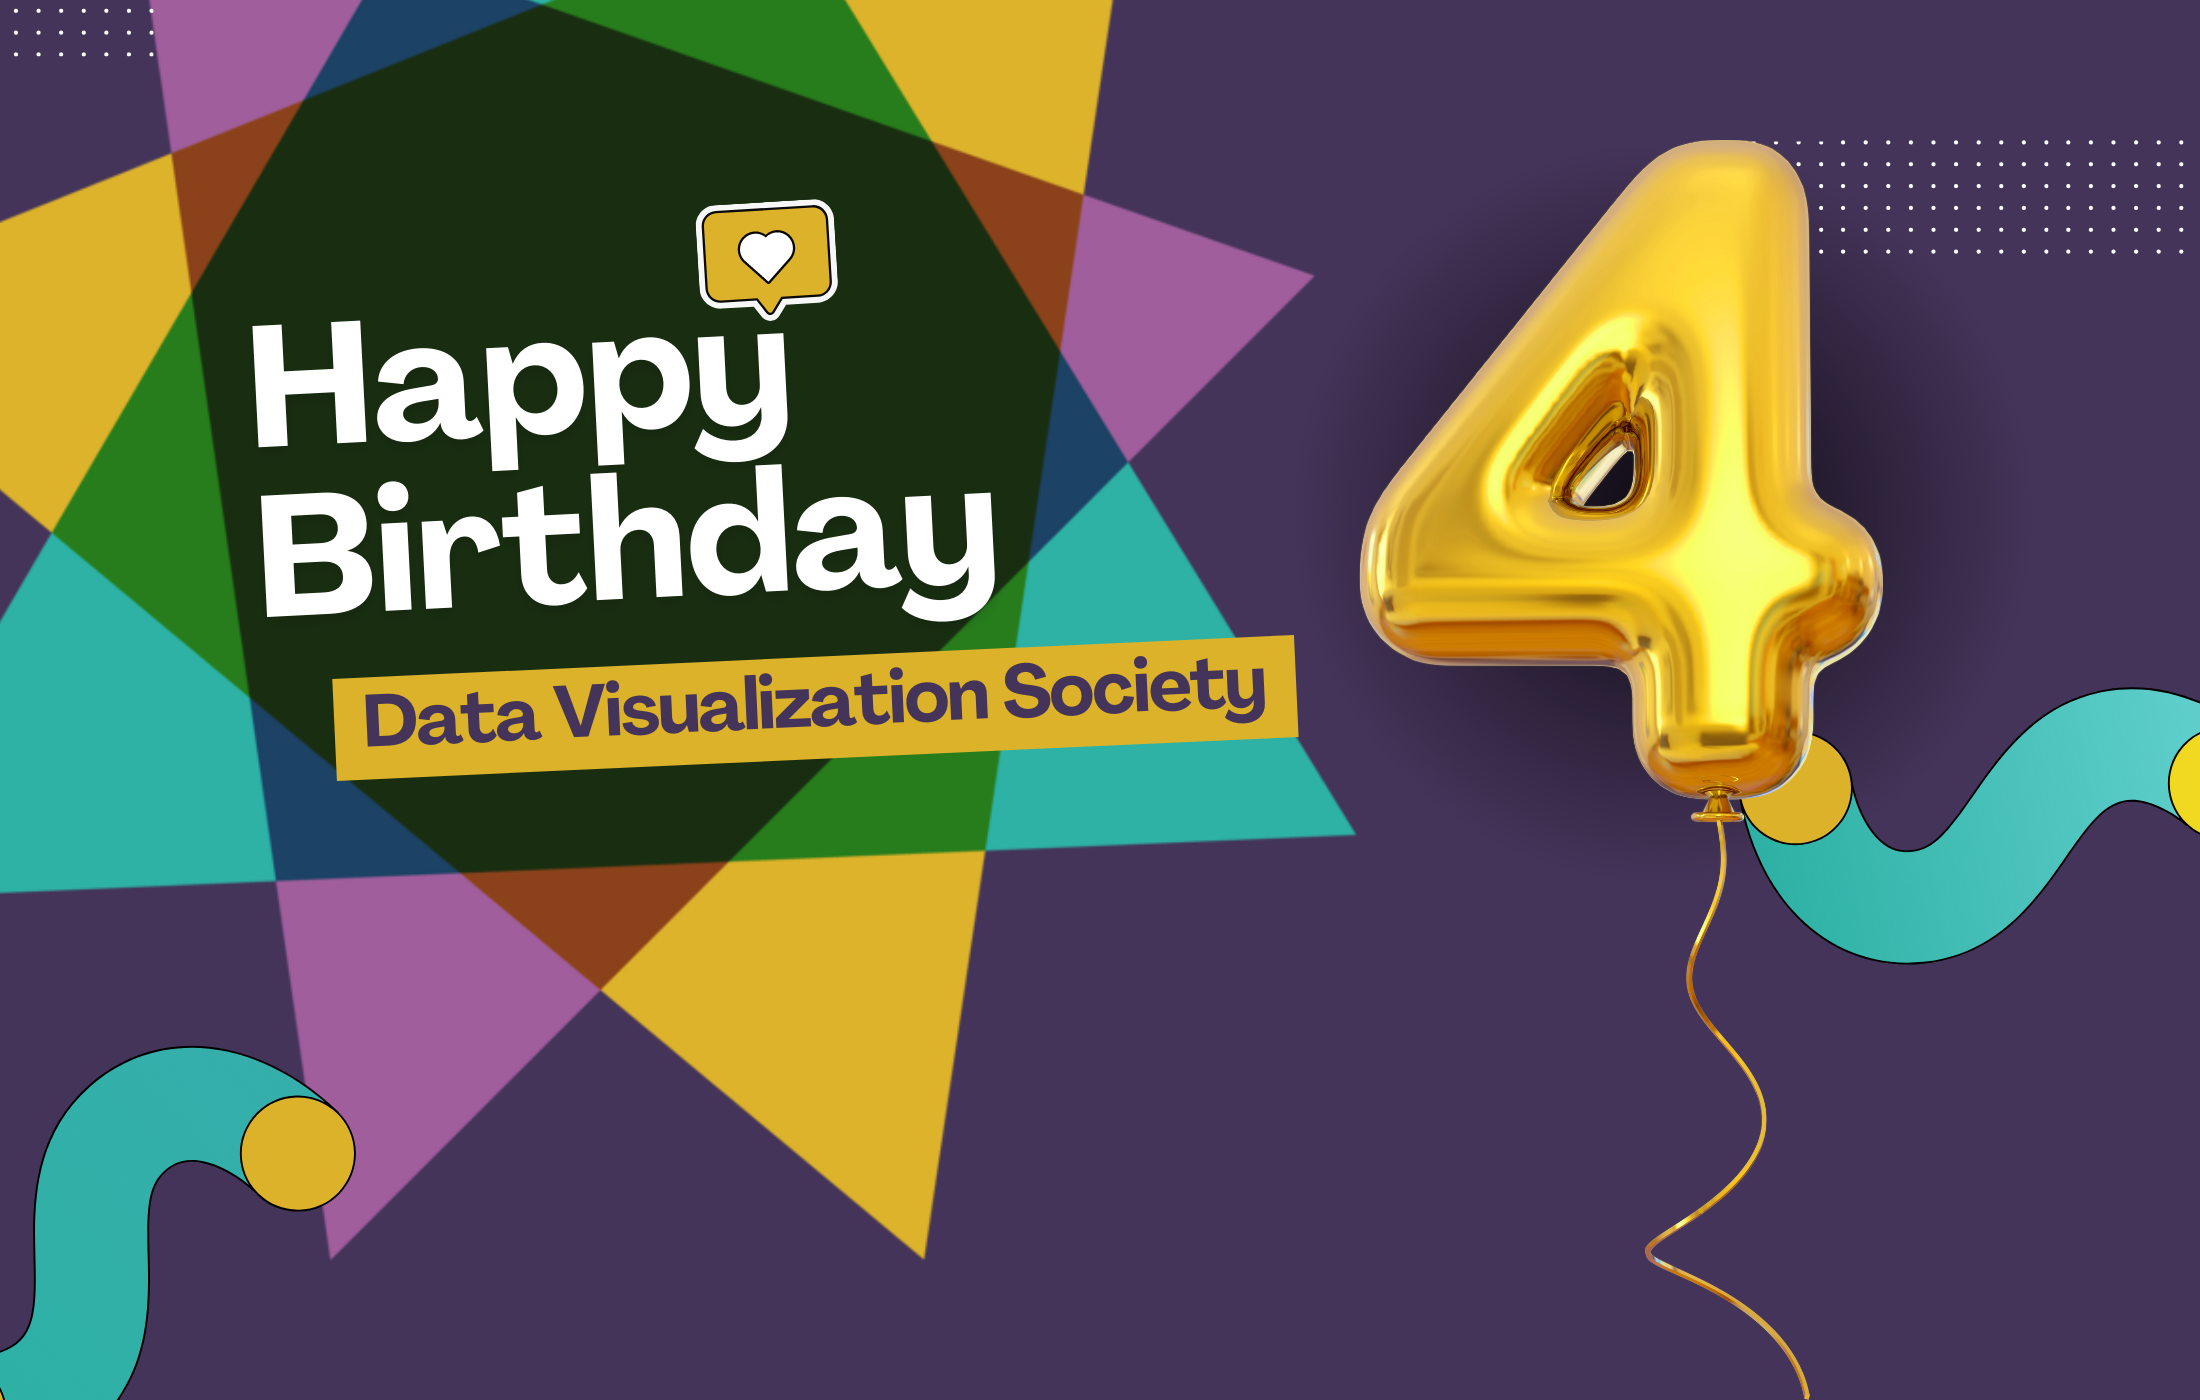 Image of a number-four helium balloon, with happy birthday text showing the Data Visualization Society turns 4.